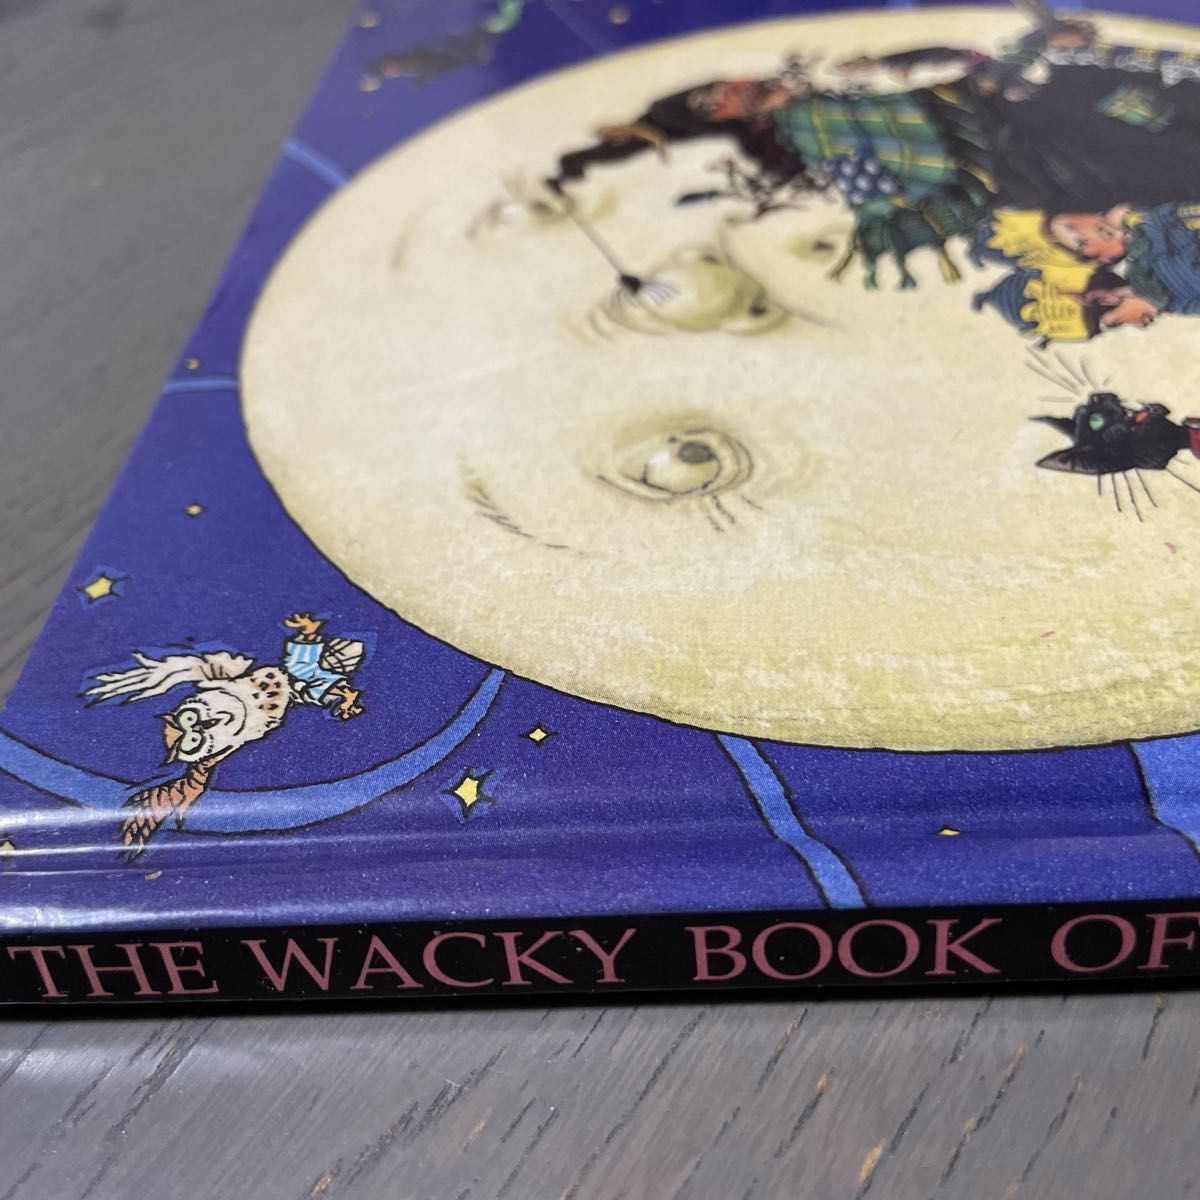 The  Wacky  Book of Witches 洋書　魔女　ゆうパック匿名配送　ギフト　英語